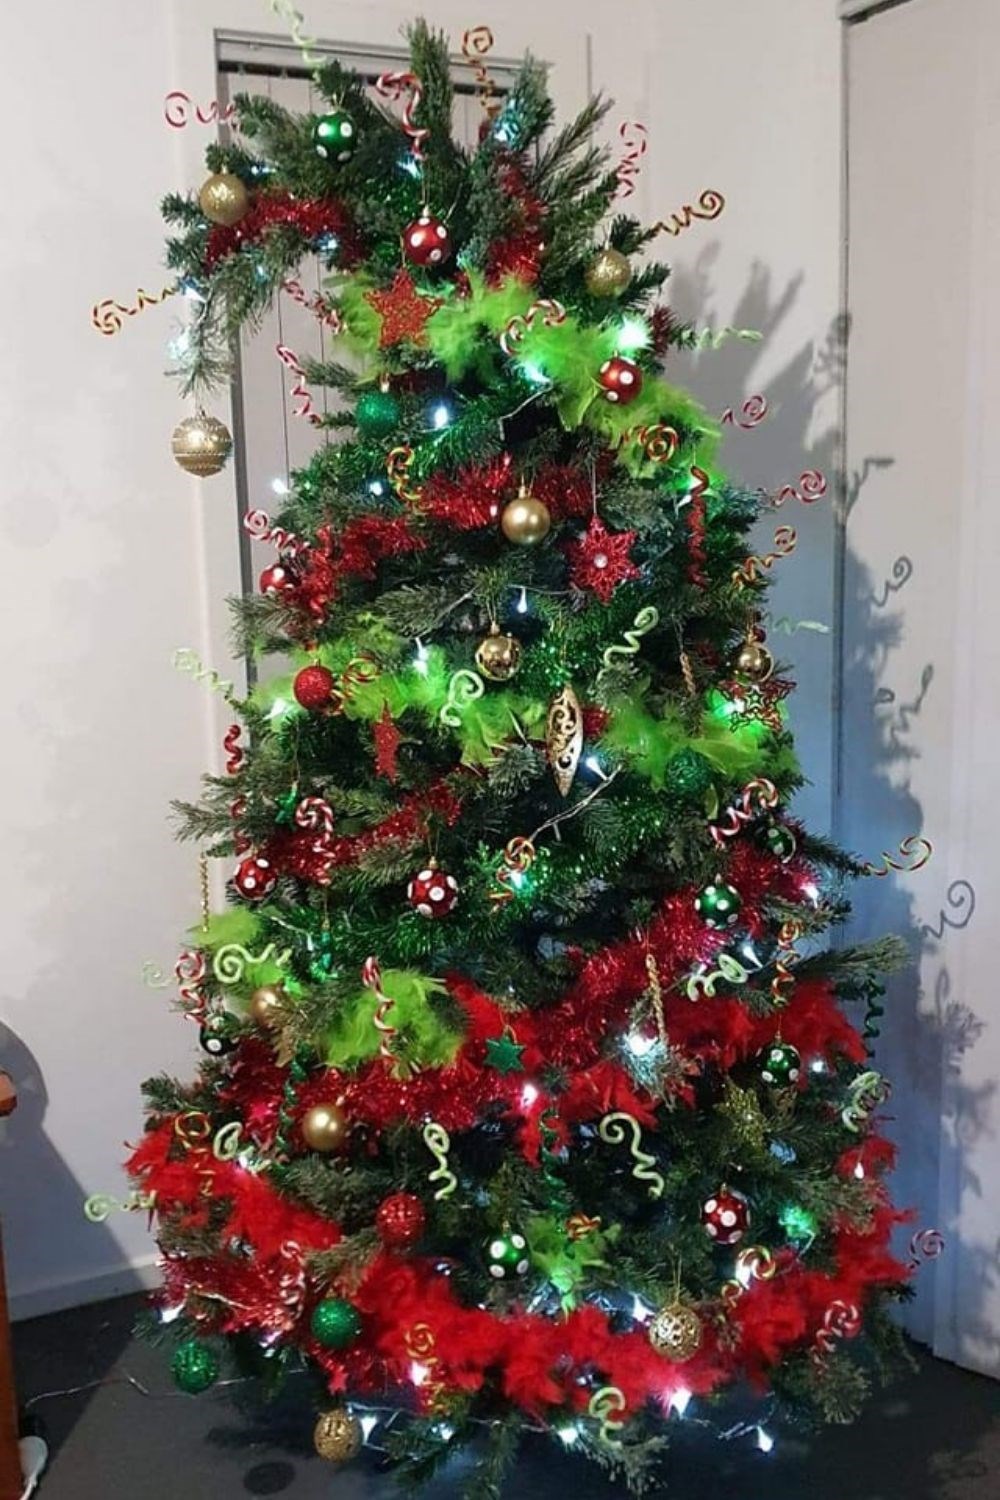 These moviethemed Christmas trees are going viral Better Homes and